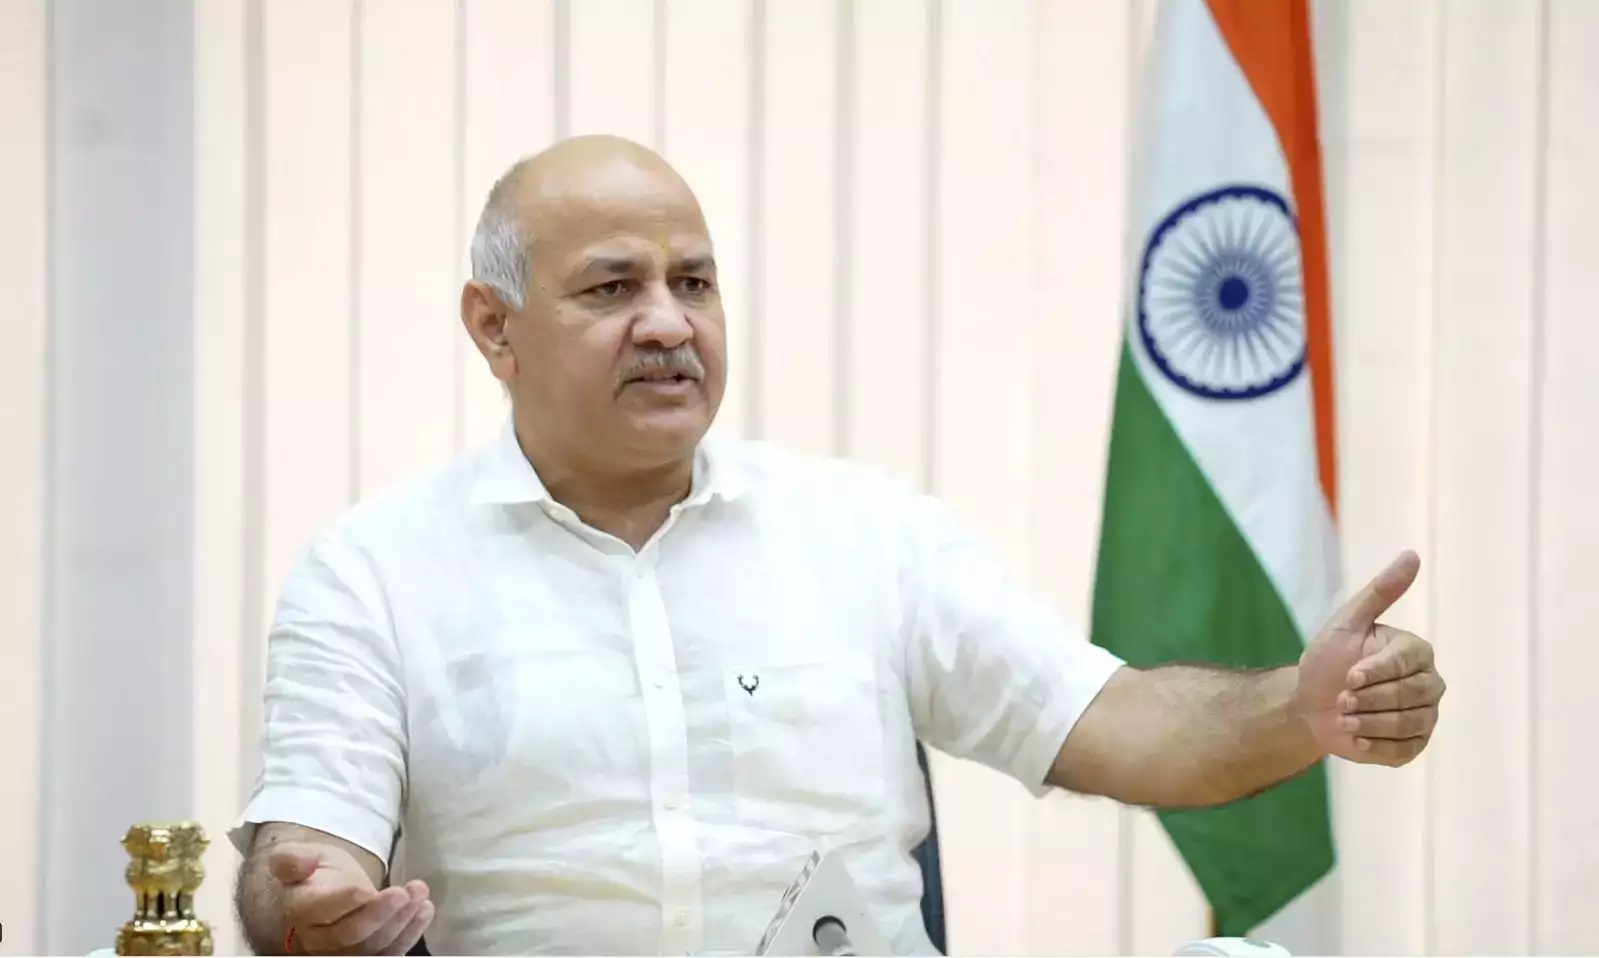 Manish Sisodia: Bharat Biotech says can’t give additional Covaxin doses to Delhi